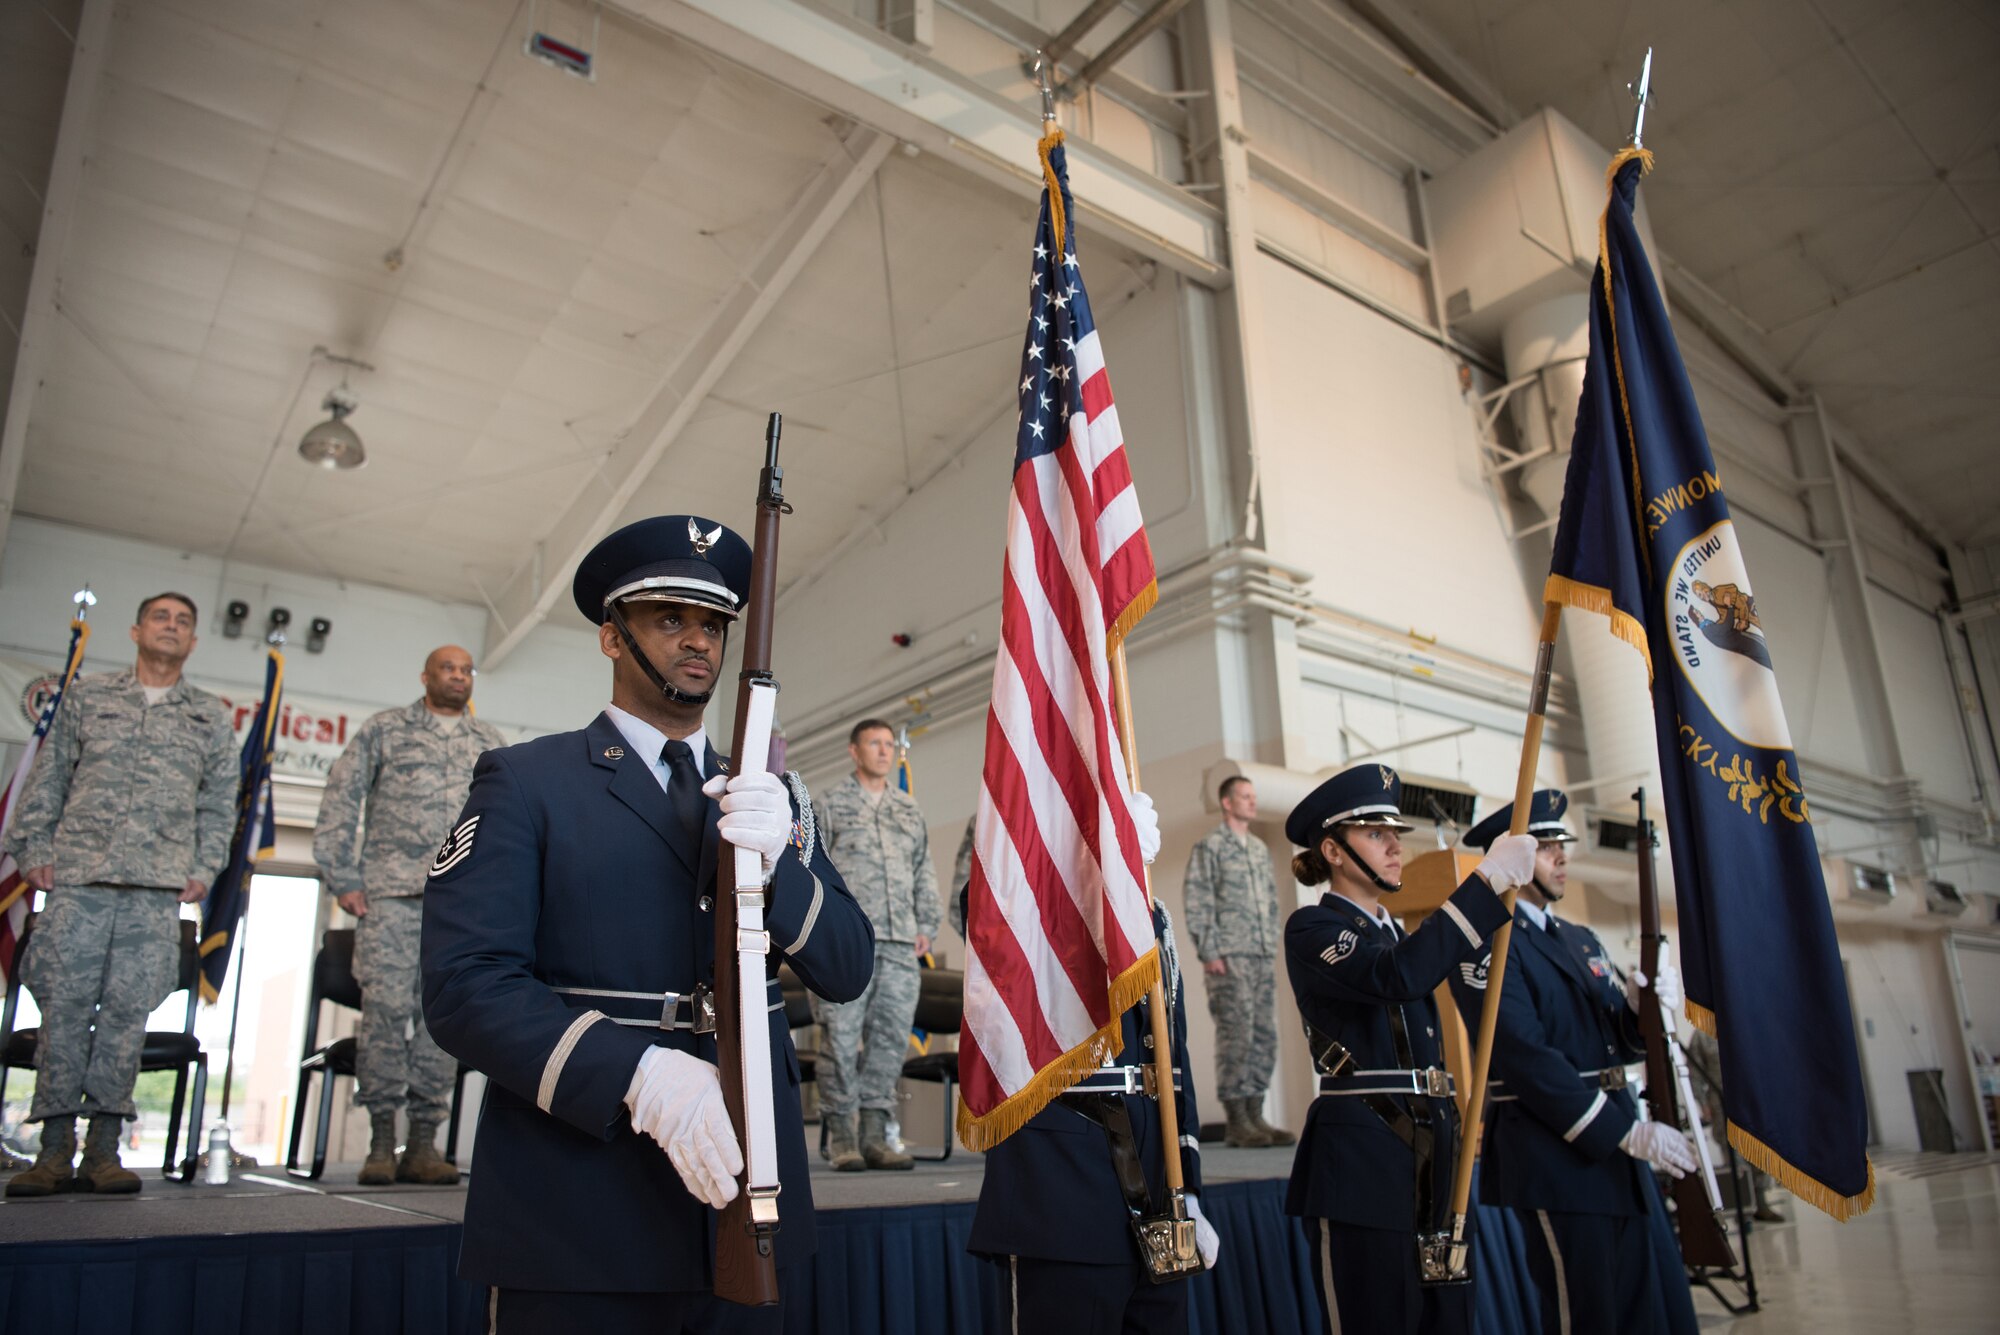 The 123rd Airlift Wing Honor Guard presents the colors during a ceremony at the Kentucky Air National Guard Base in Louisville, Ky., Sept. 16, 2018, celebrating the wing’s accomplishments in the last year. The ceremony concluded with the presentation of the wing’s 17th Outstanding Unit Award, eighth Distinguished Flying Unit Plaque and the 2017 Contingency Response Unit of the Year Award. (U.S. Air National Guard photo by Staff Sgt. Joshua Horton)